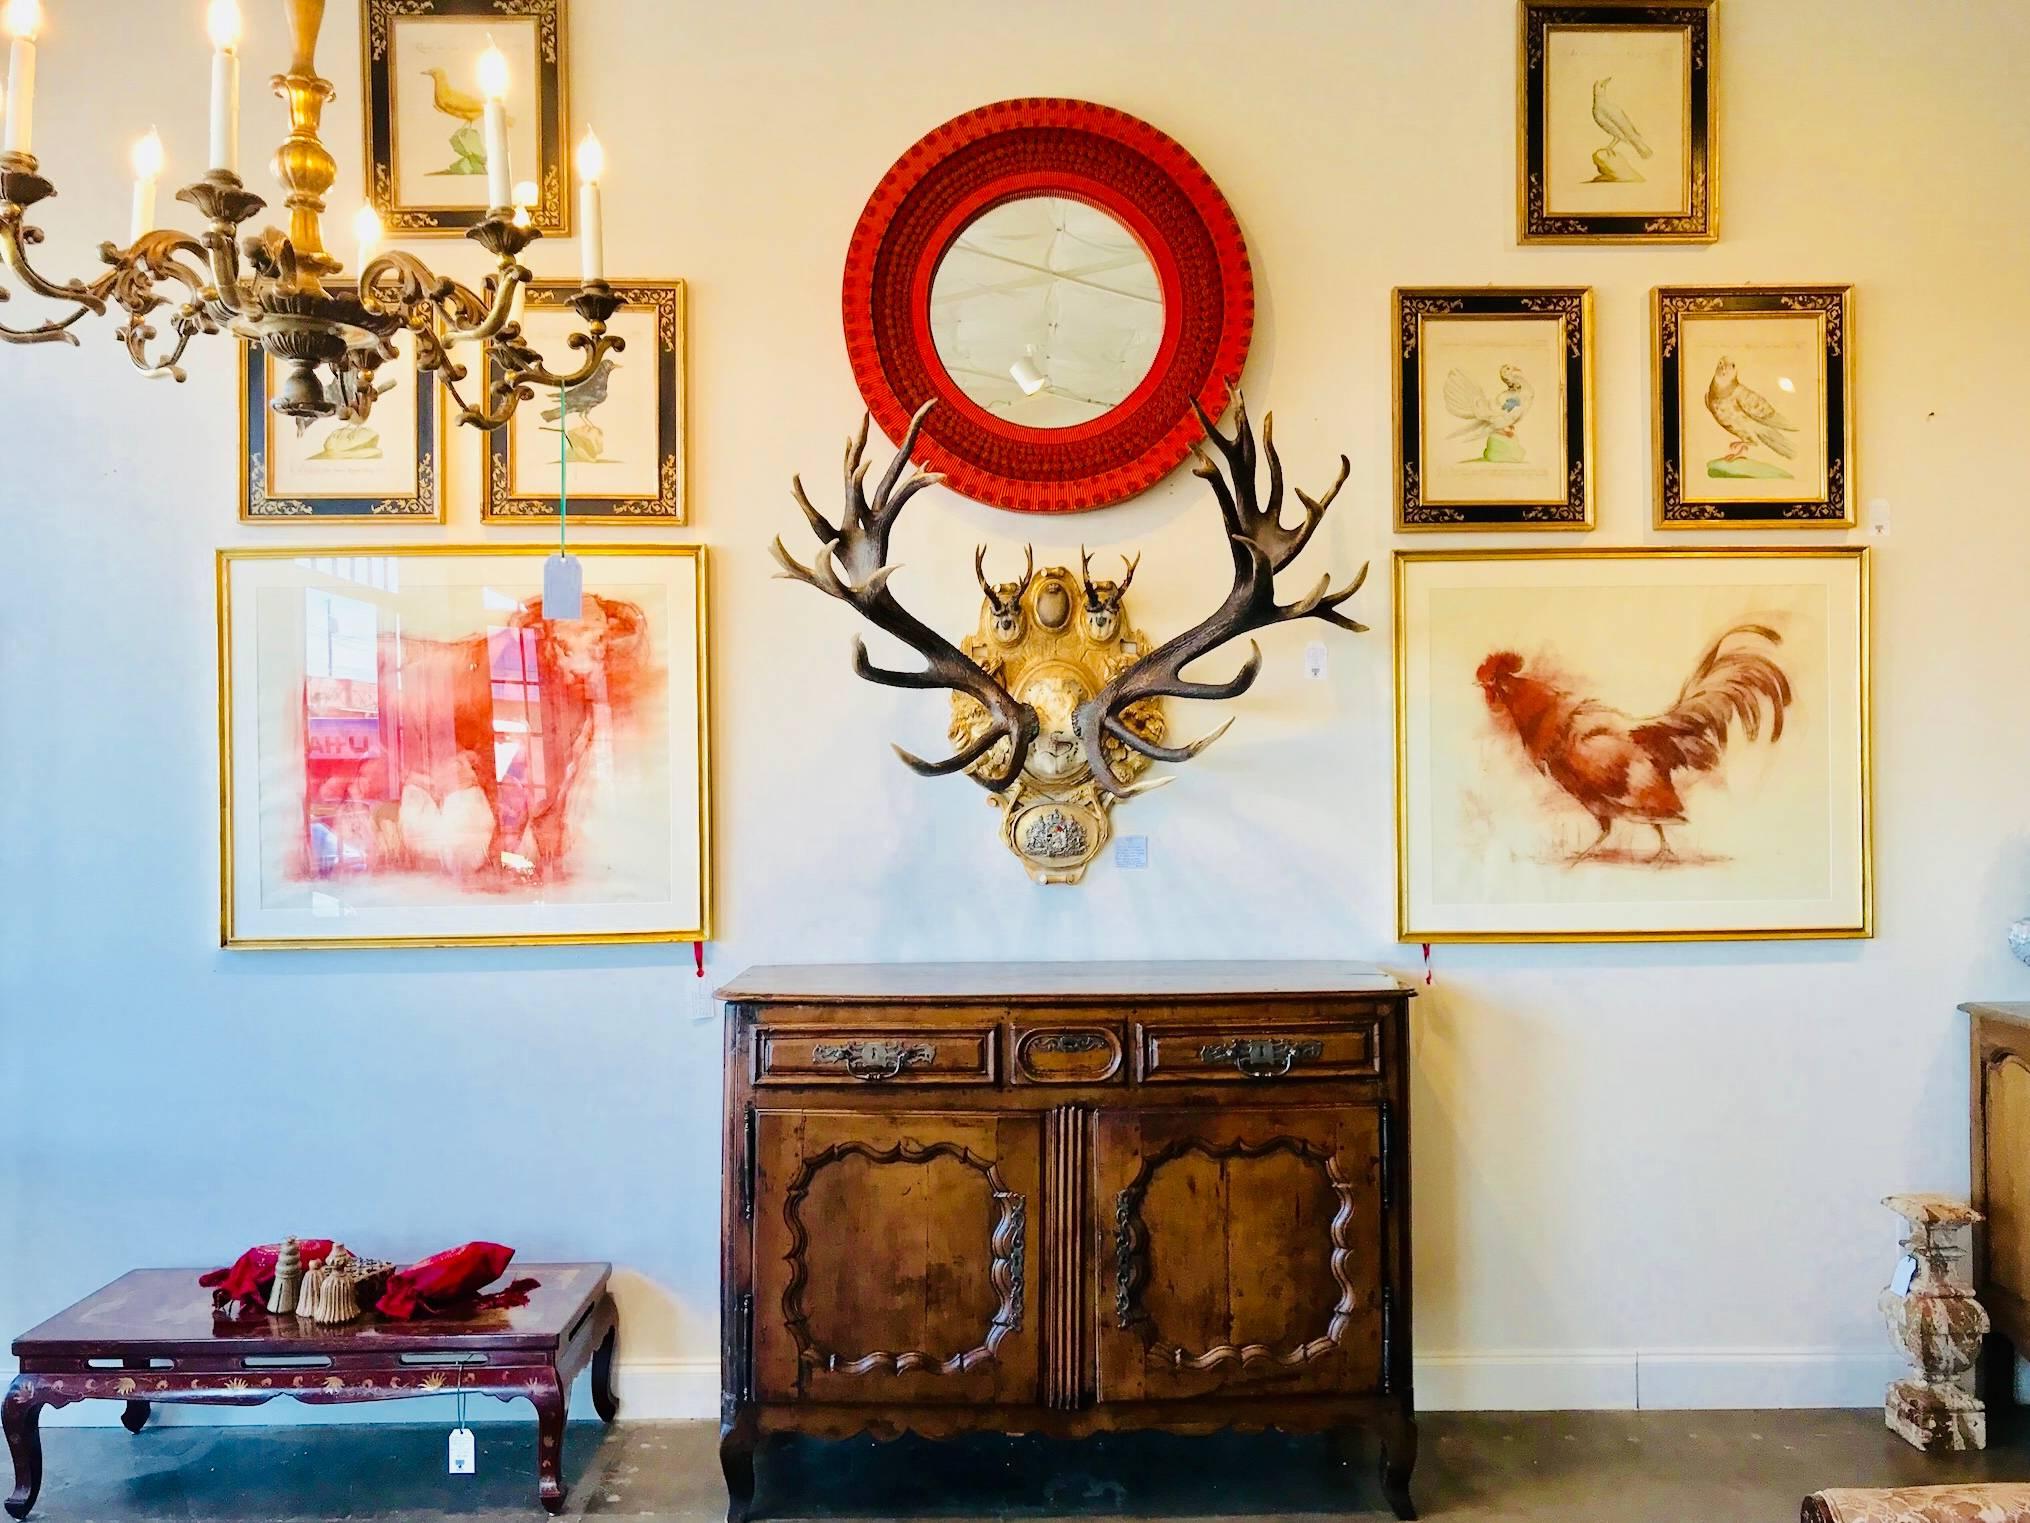 This nineteenth century red stag with pairing of roe trophies features an exquisite hand-carved gilt plaque, decorated with the emblem of St. Sepulcre, a division of the Knights Templar. This piece also features the original hardware of Kaiser